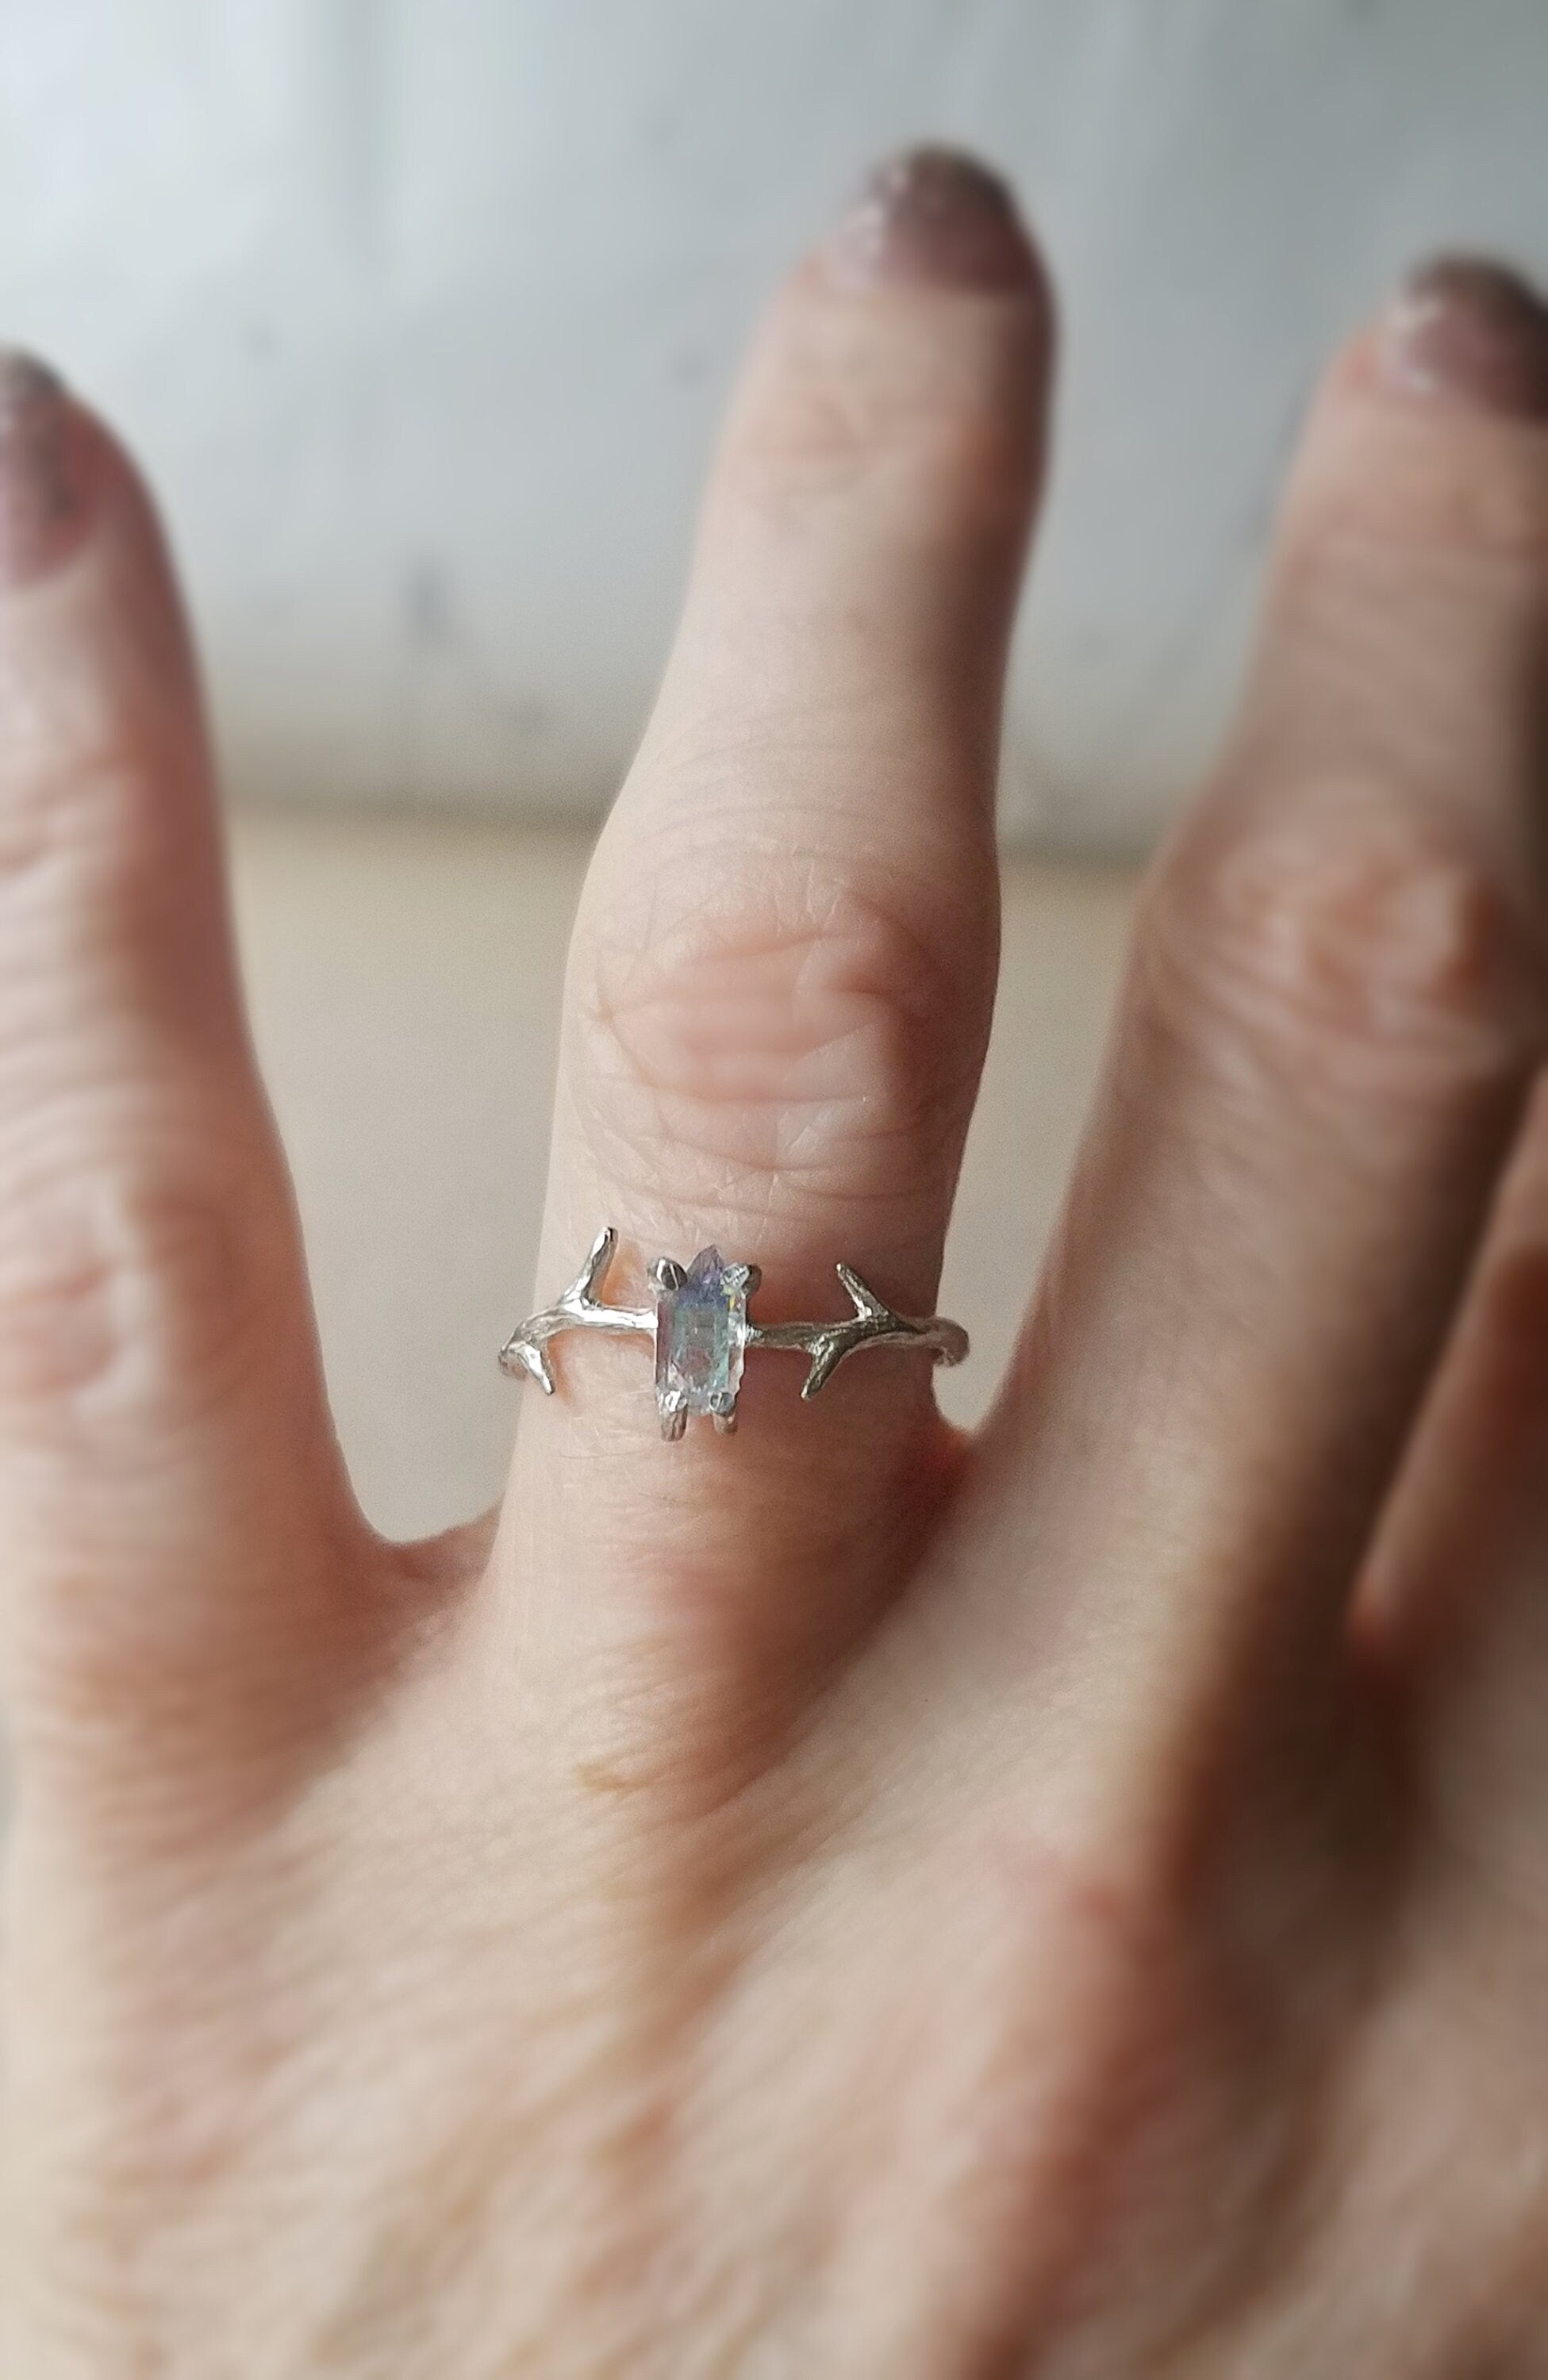 Twig Ring in Fine Sterling Silver & Angel Aura, Antler Band with Iridescent Blue Aura Ring for Libra or Scorpio Zodiac Birthdays, 6~ish